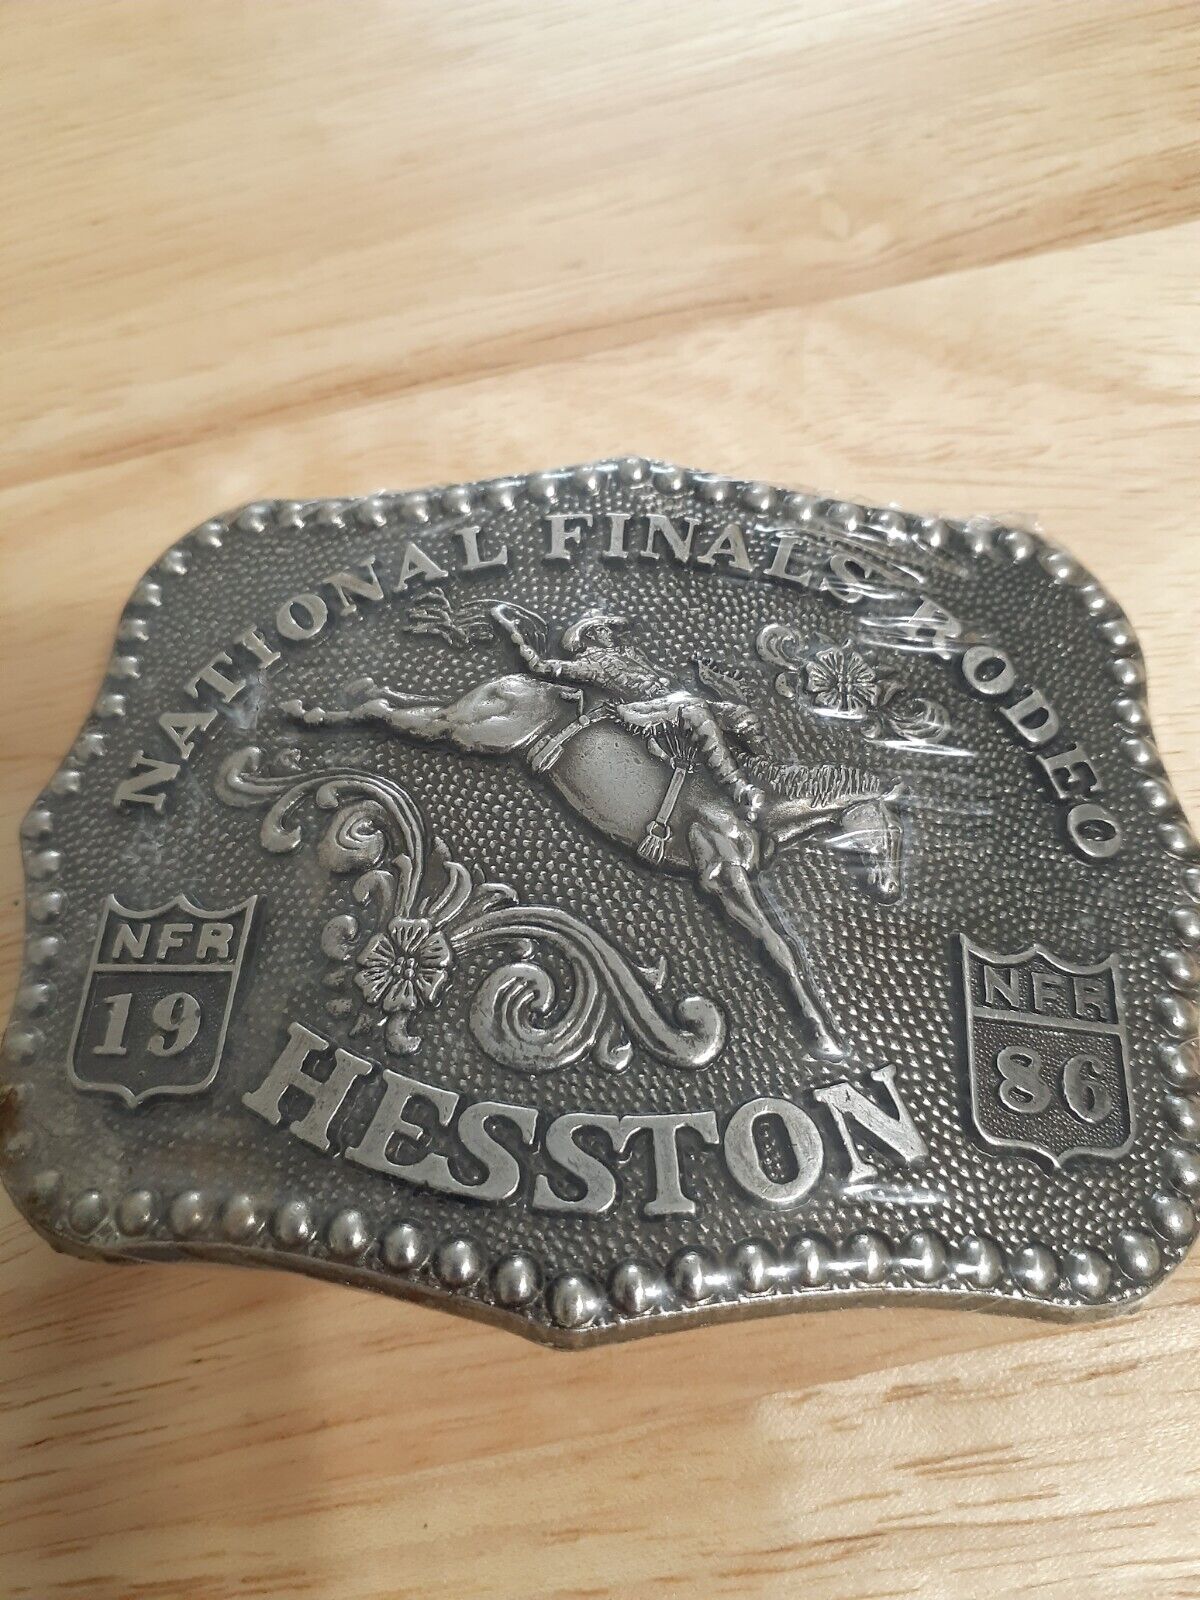 VINTAGE 1986 HESSTON NATIONAL FINALS RODEO BELT BUCKLE FRED FELLOWS SEALED 